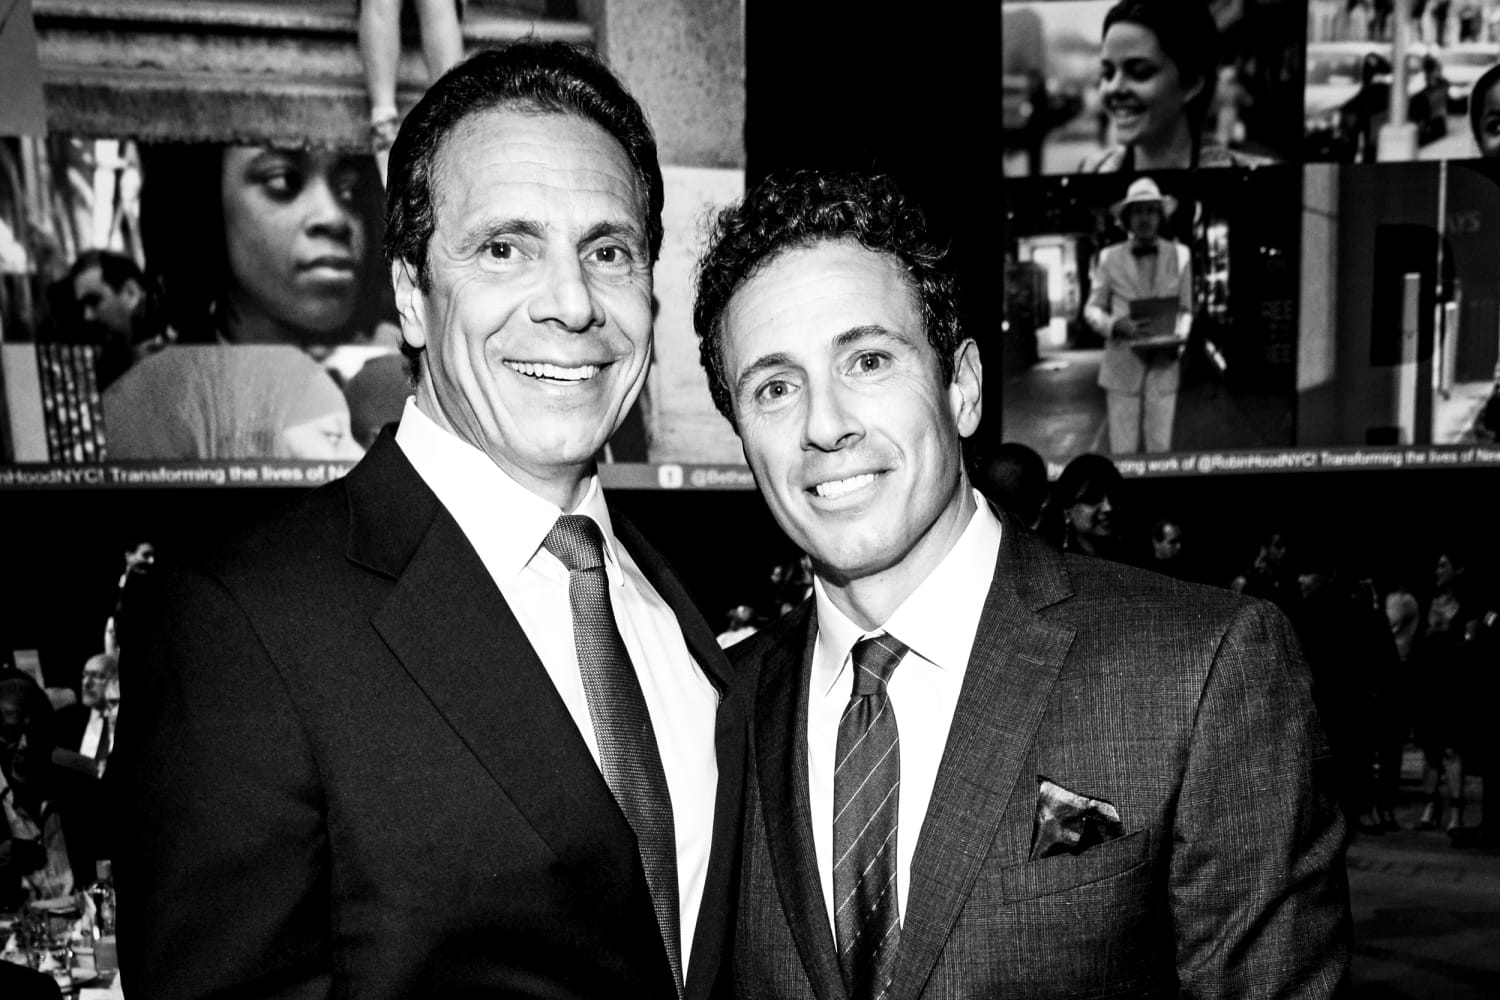 More details revealed about Chris Cuomo’s role as adviser to brother, former governor